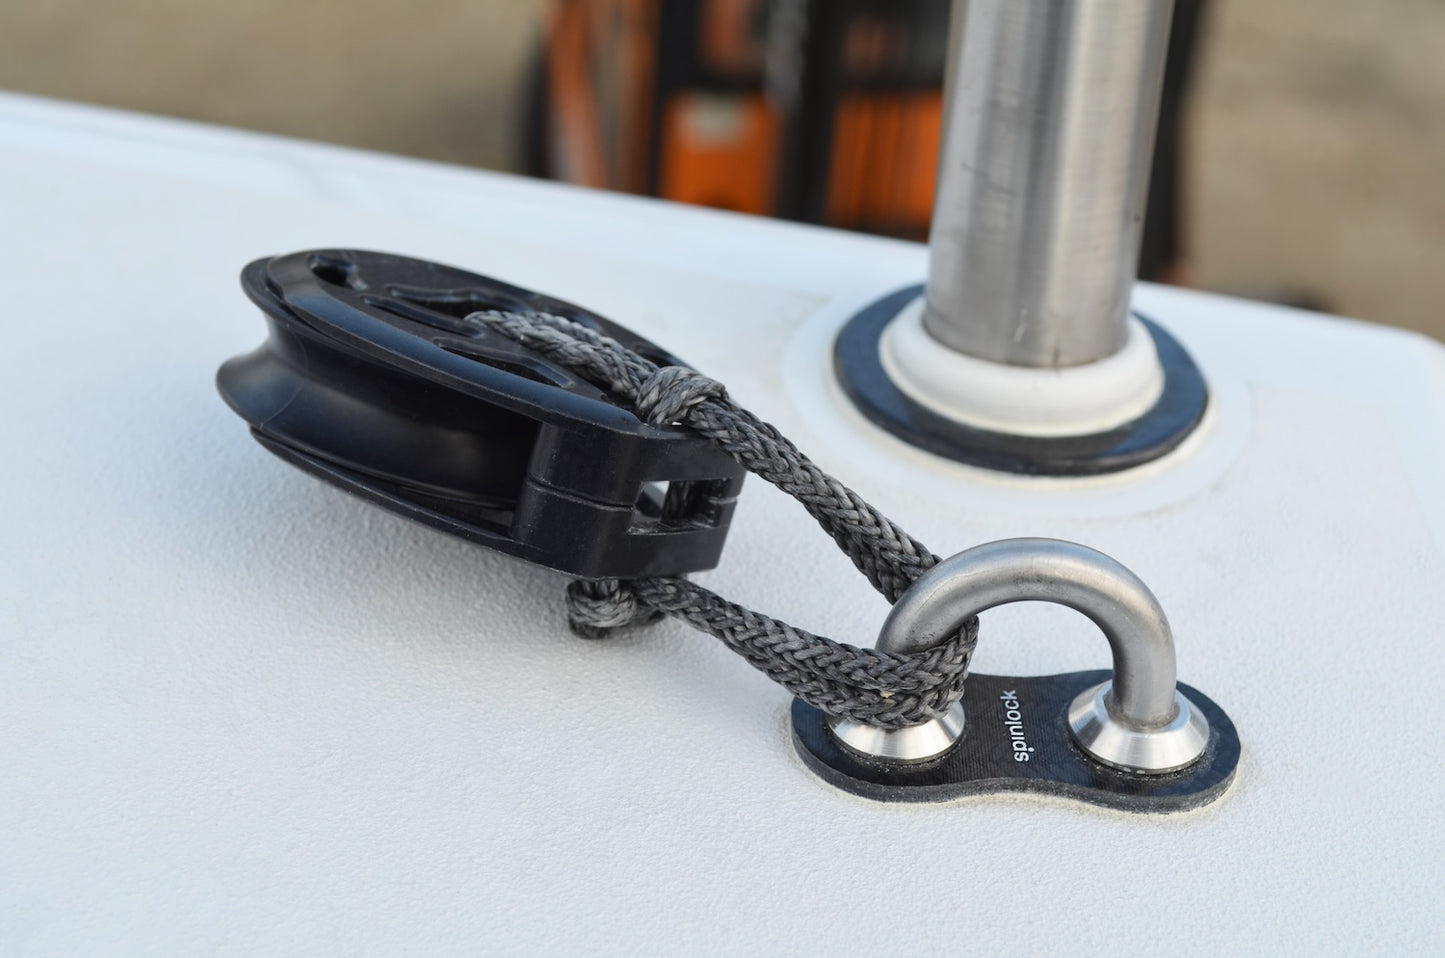 Spinlock High-Strength Padeye 8mm In 17-4PH with Carbon Plates | SendIt Sailing